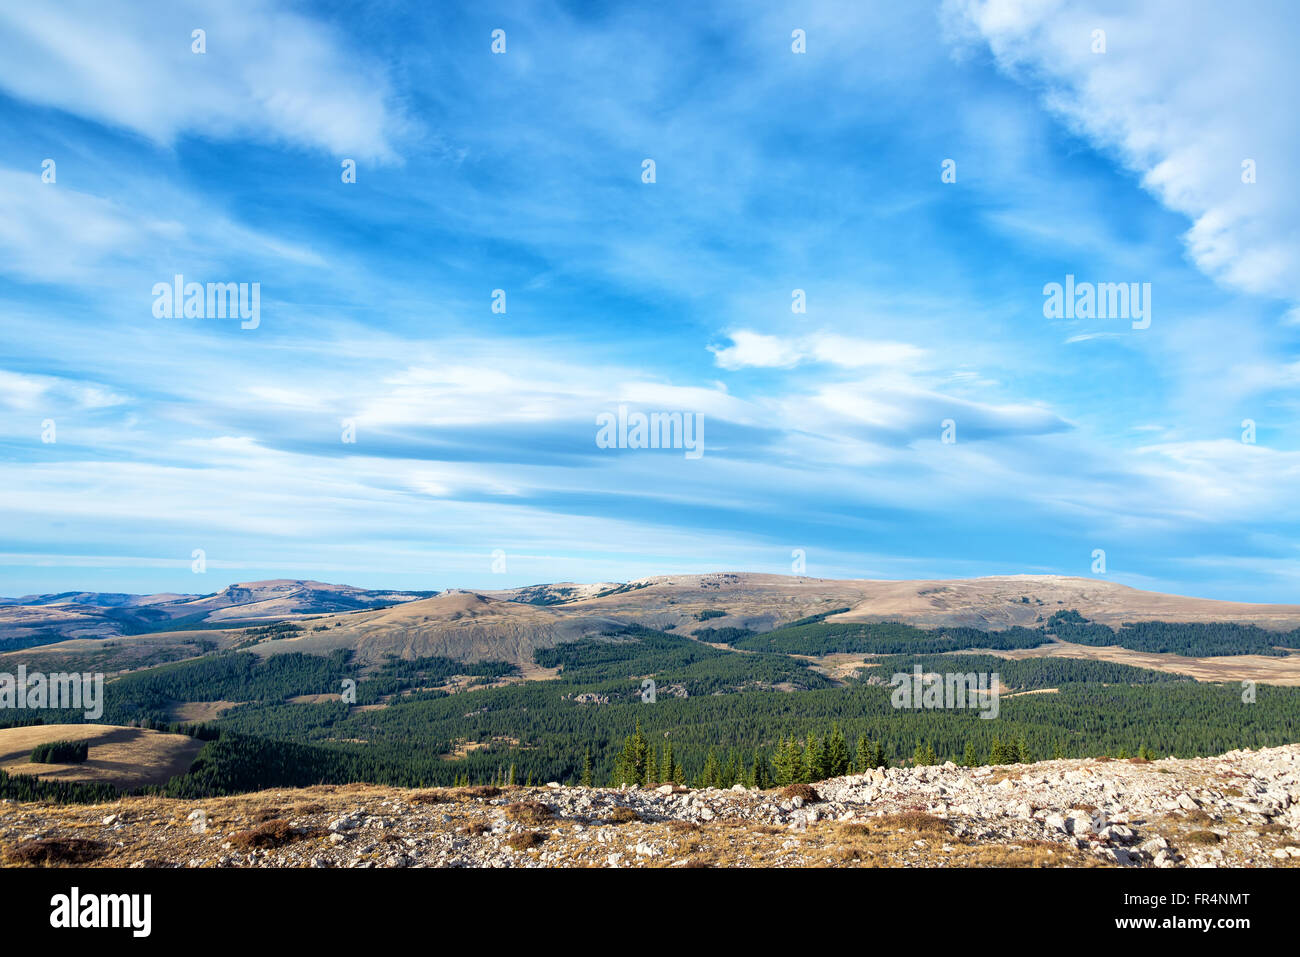 Late afternoon landscape in the Bighorn Mountains near the Medicine Wheel Stock Photo